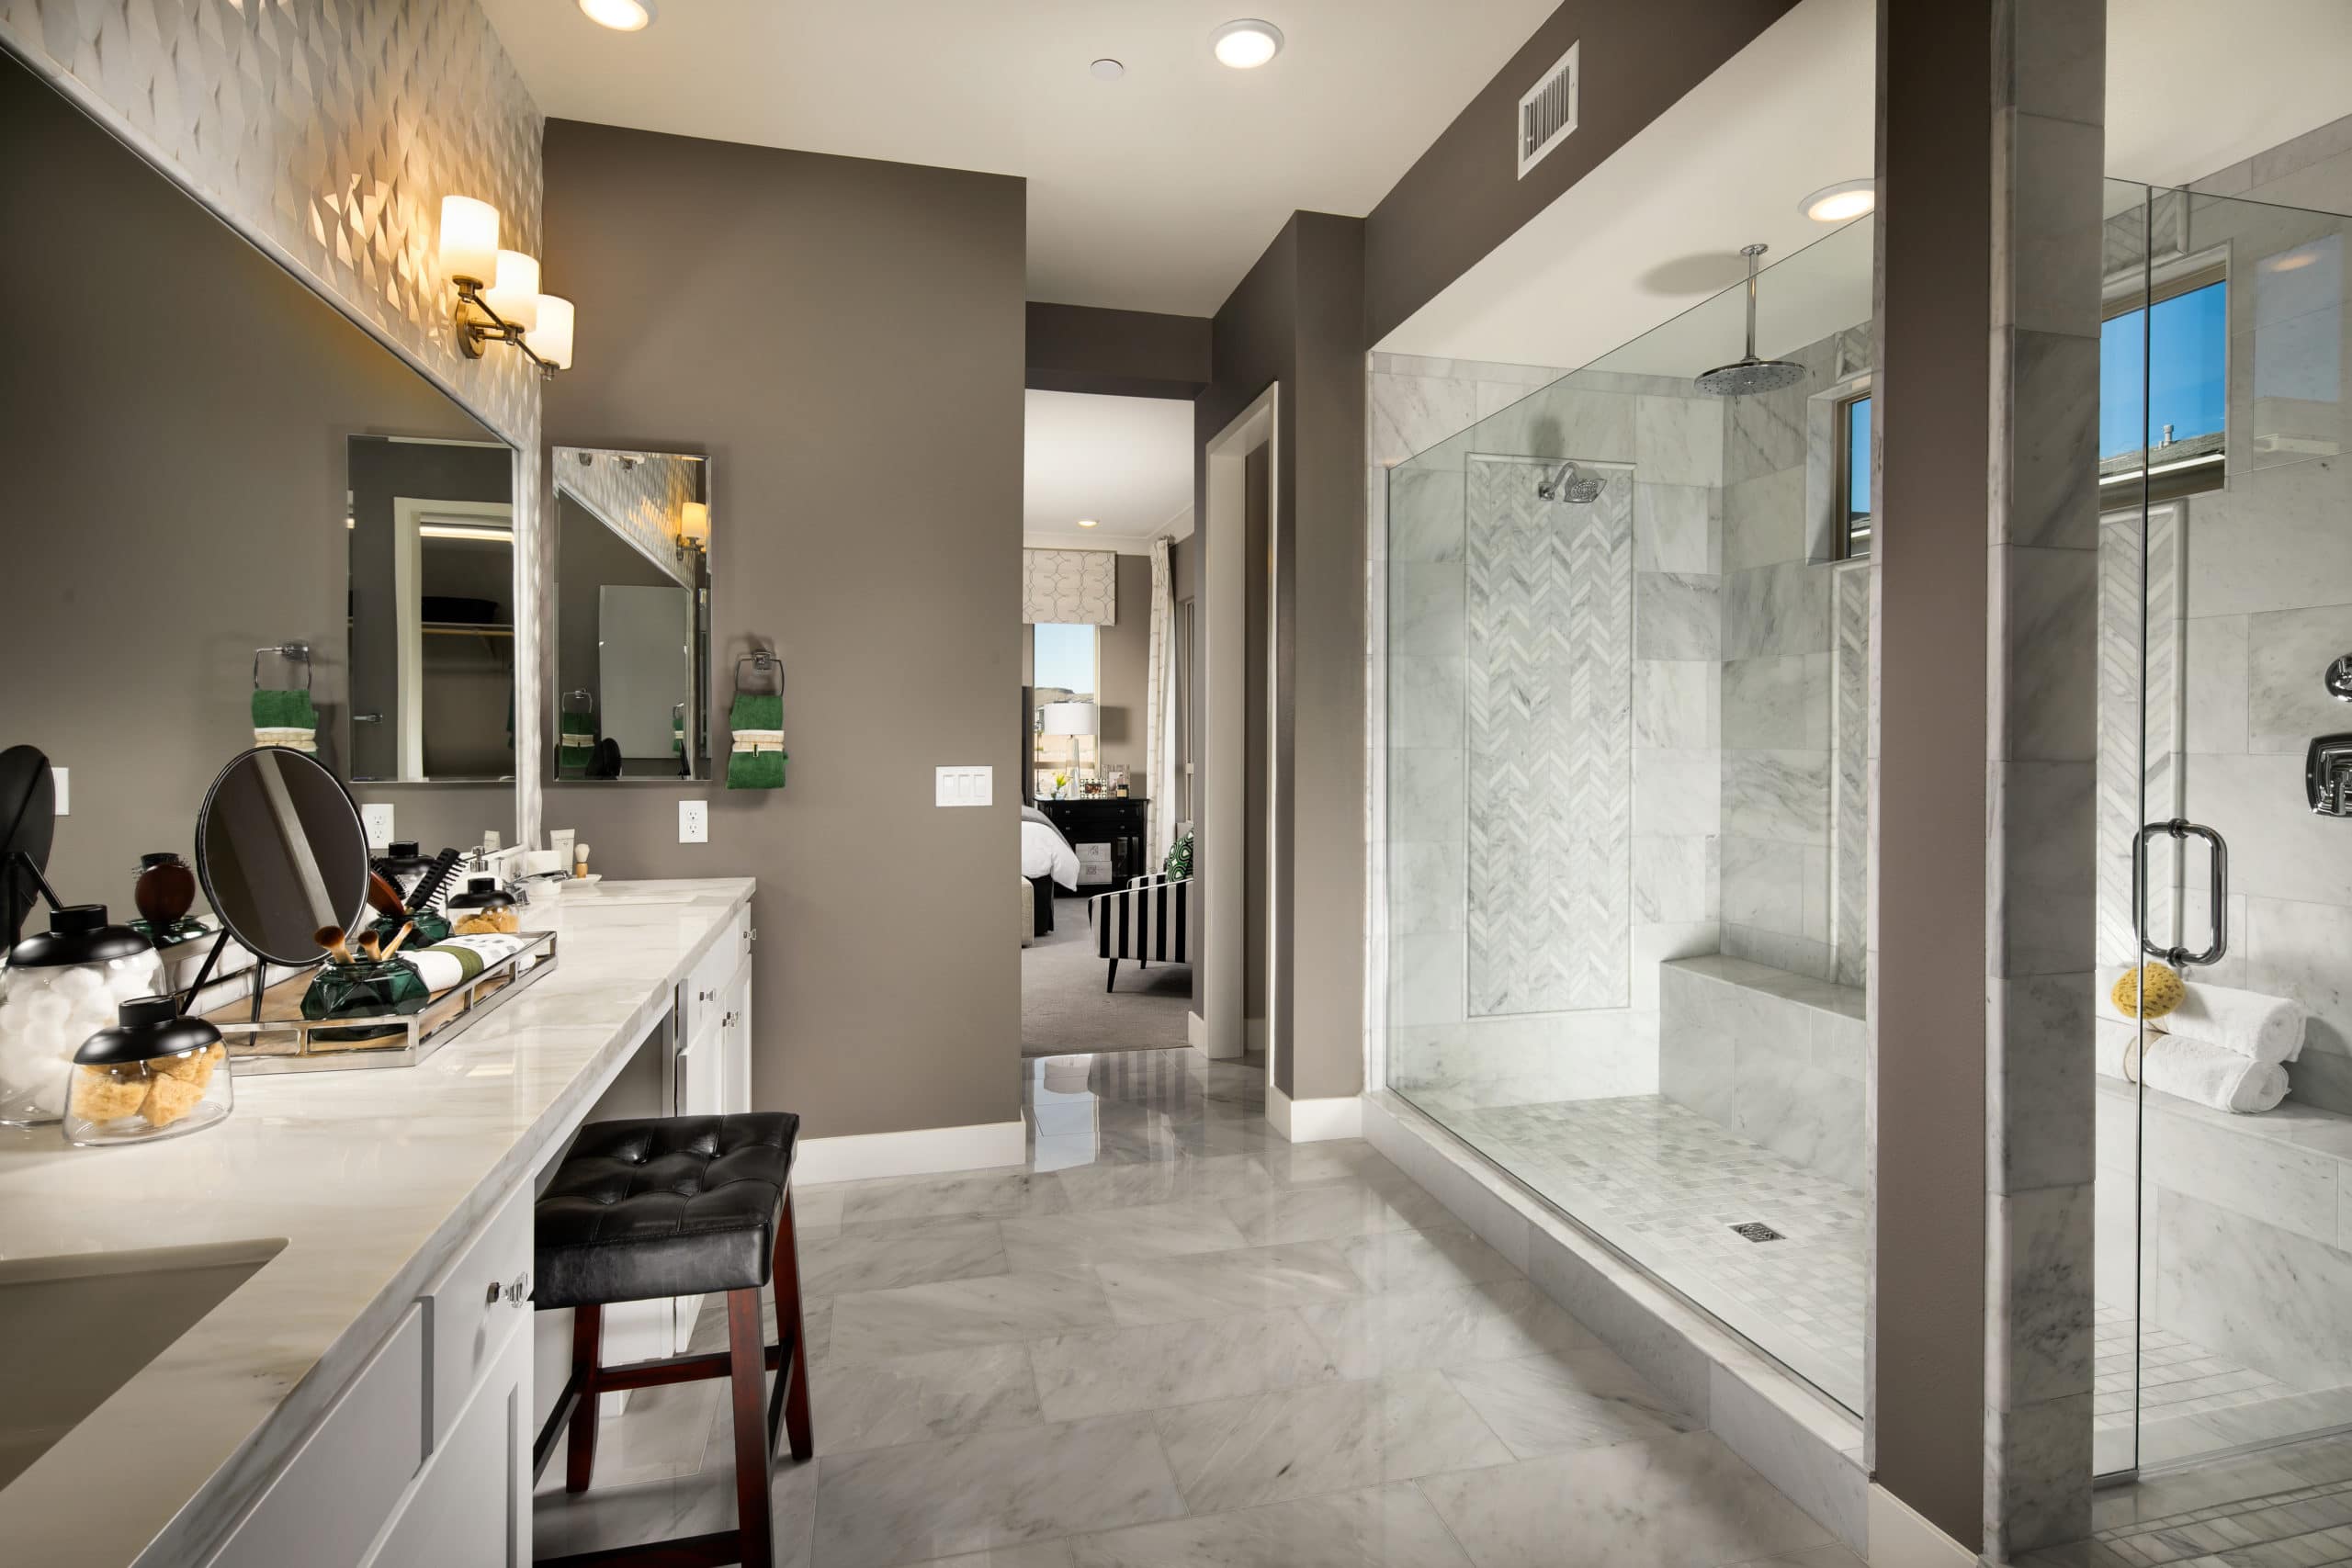 Master Bath in Viewpoint Model in Modern Collection in Trilogy by Shea Homes in South Square in Summerlin